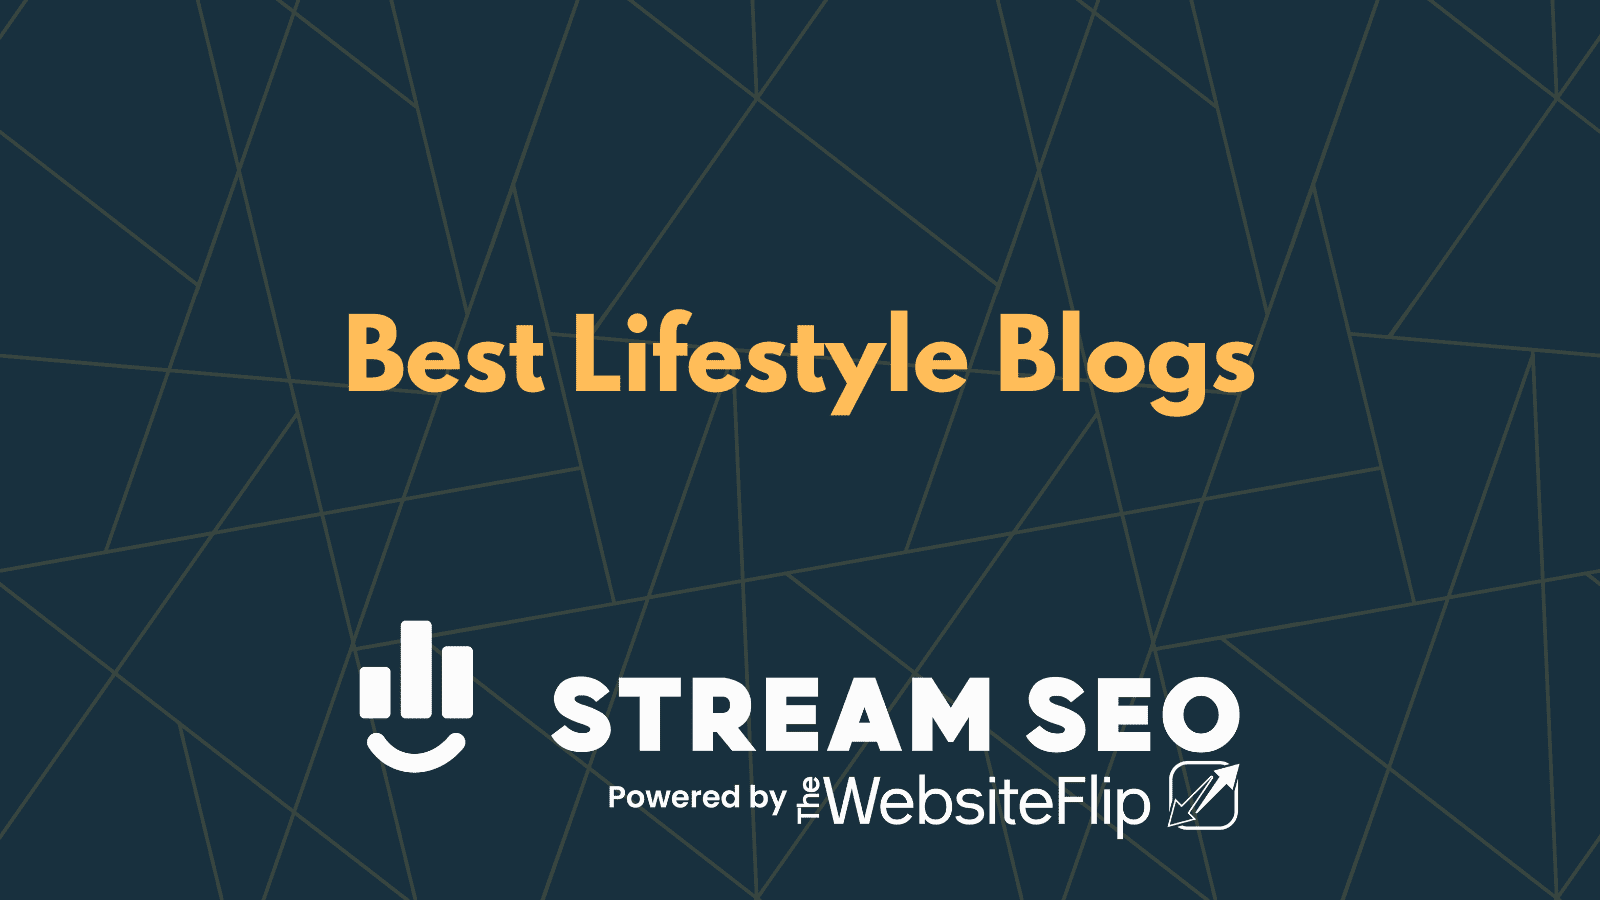 Top 10 Best Lifestyle Blogs to Follow in 2021